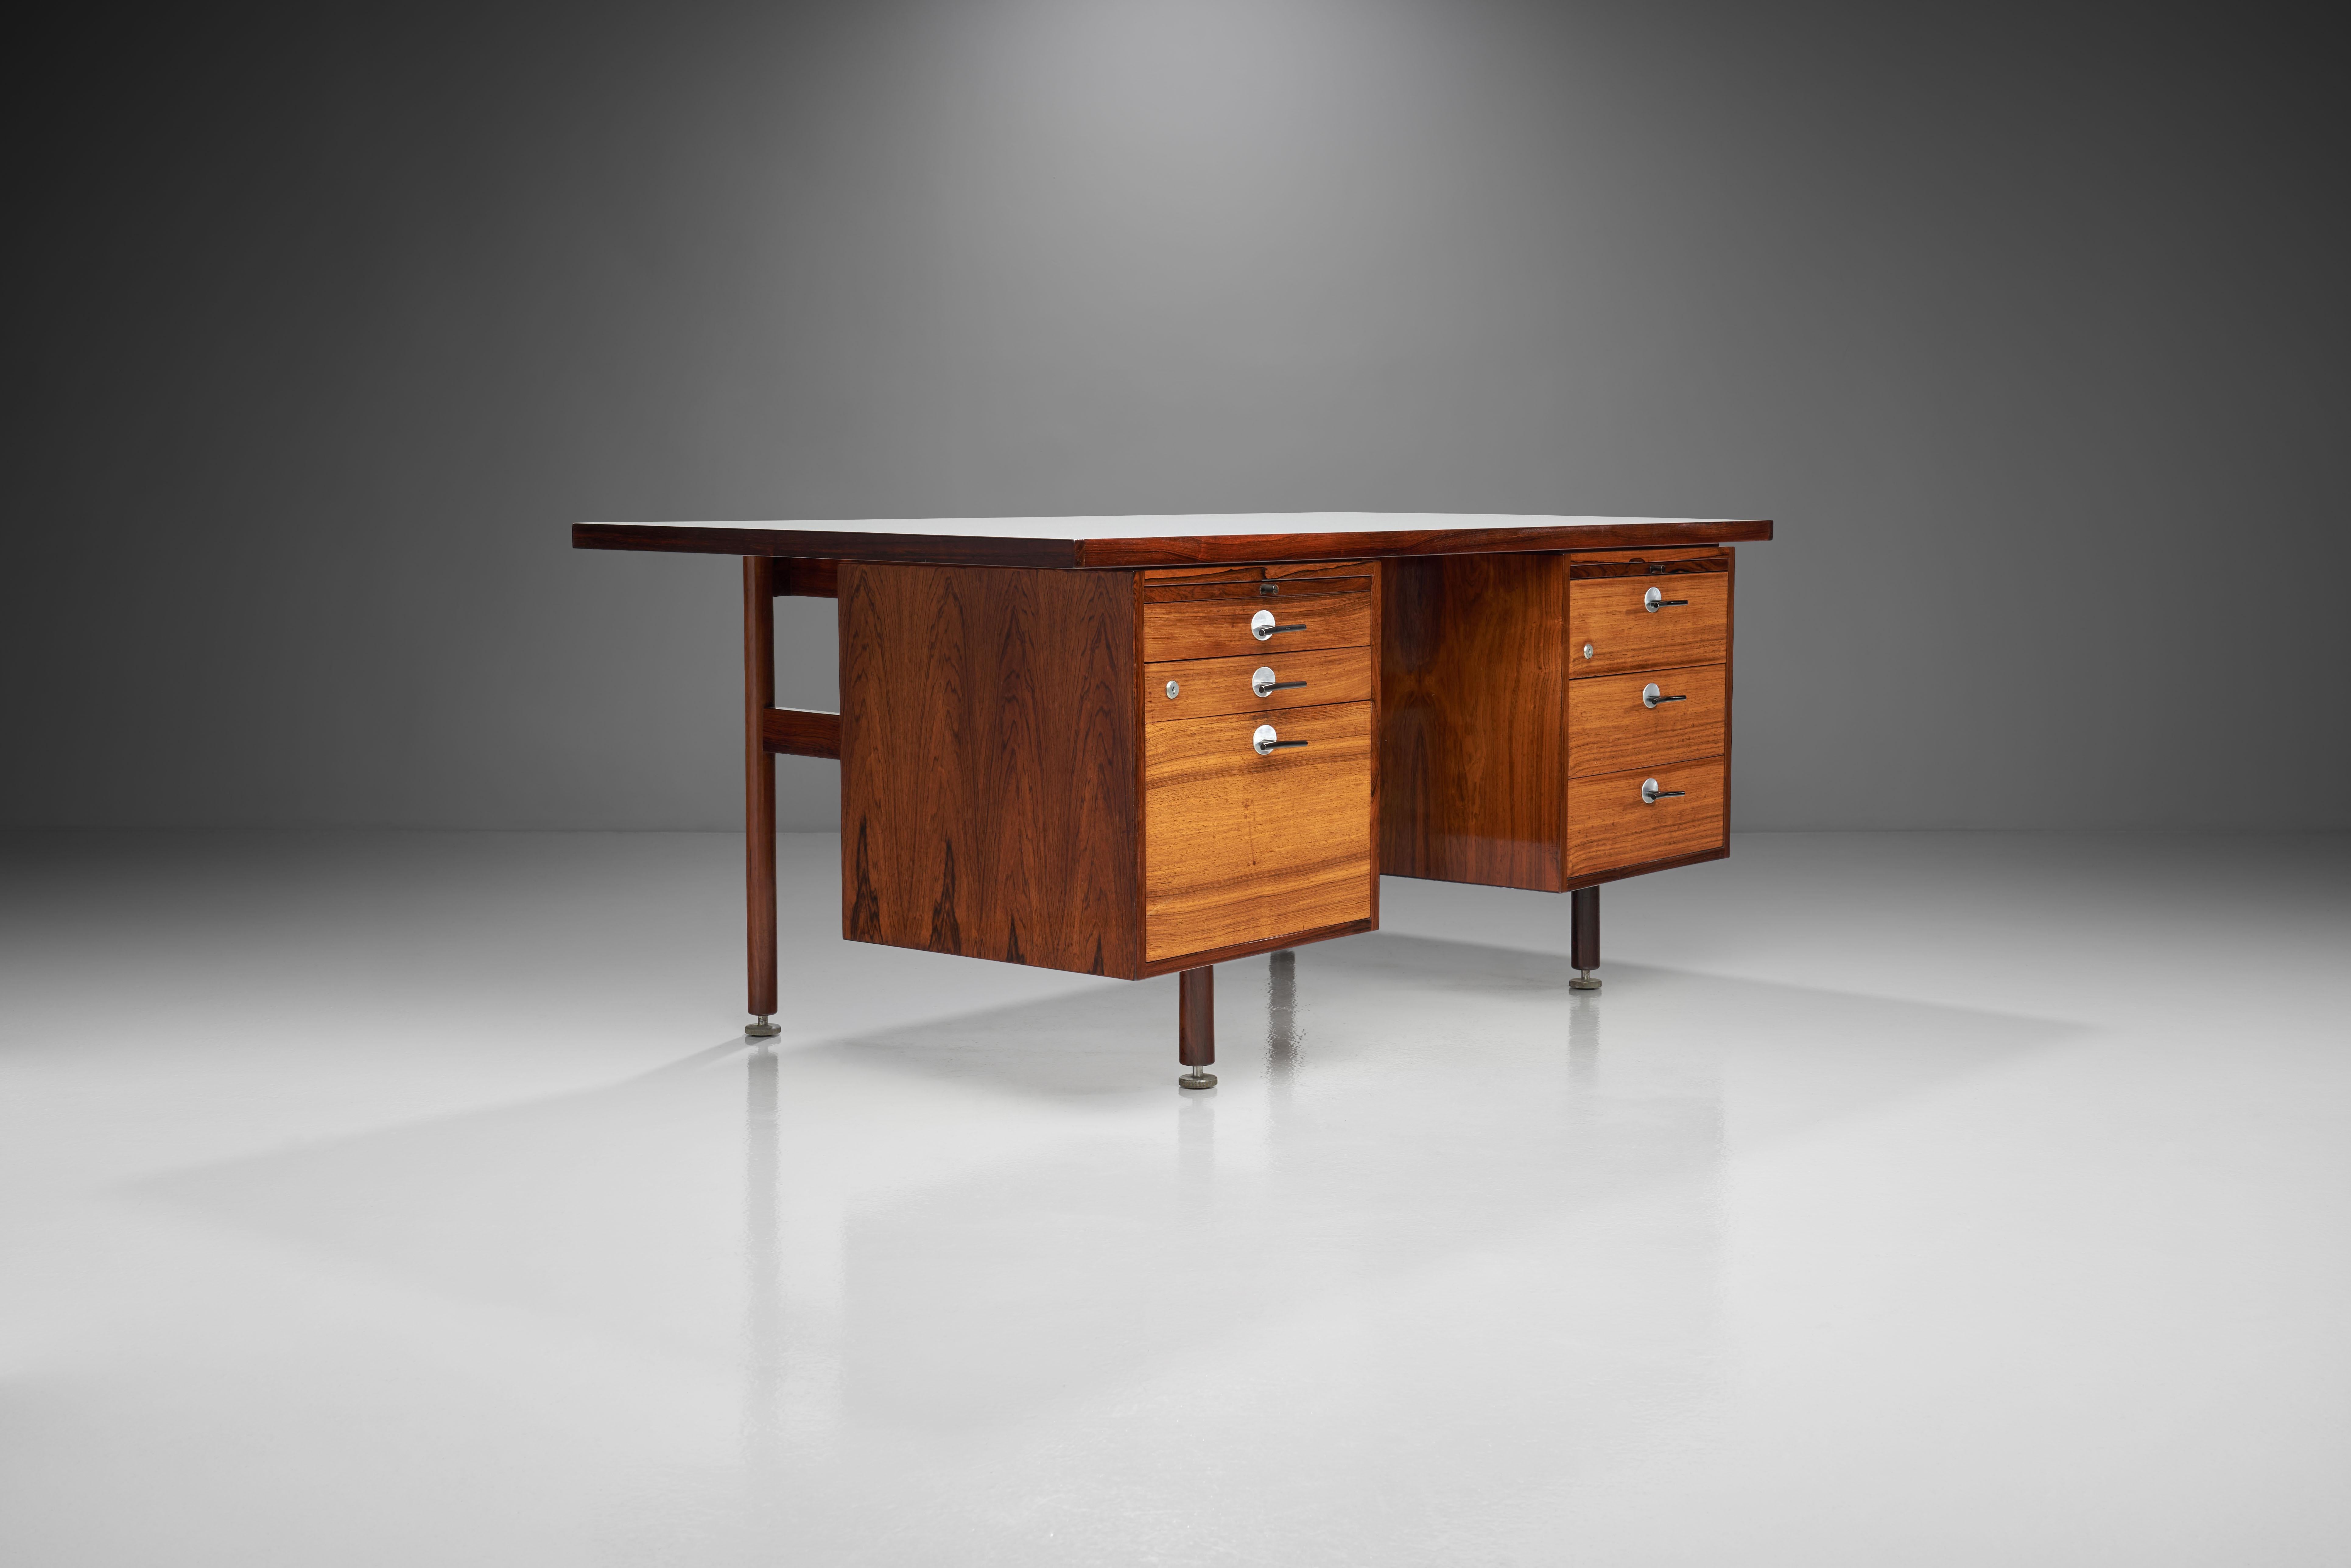 Jens Risom: wood desk, manufactured by Risom Design. 1960s. 

This nicely shaped Jens Risom desk has a well sized desktop, two drawer units with drawers and a pull-out leaf with glass top on each side. An internal lock allows you to lock the